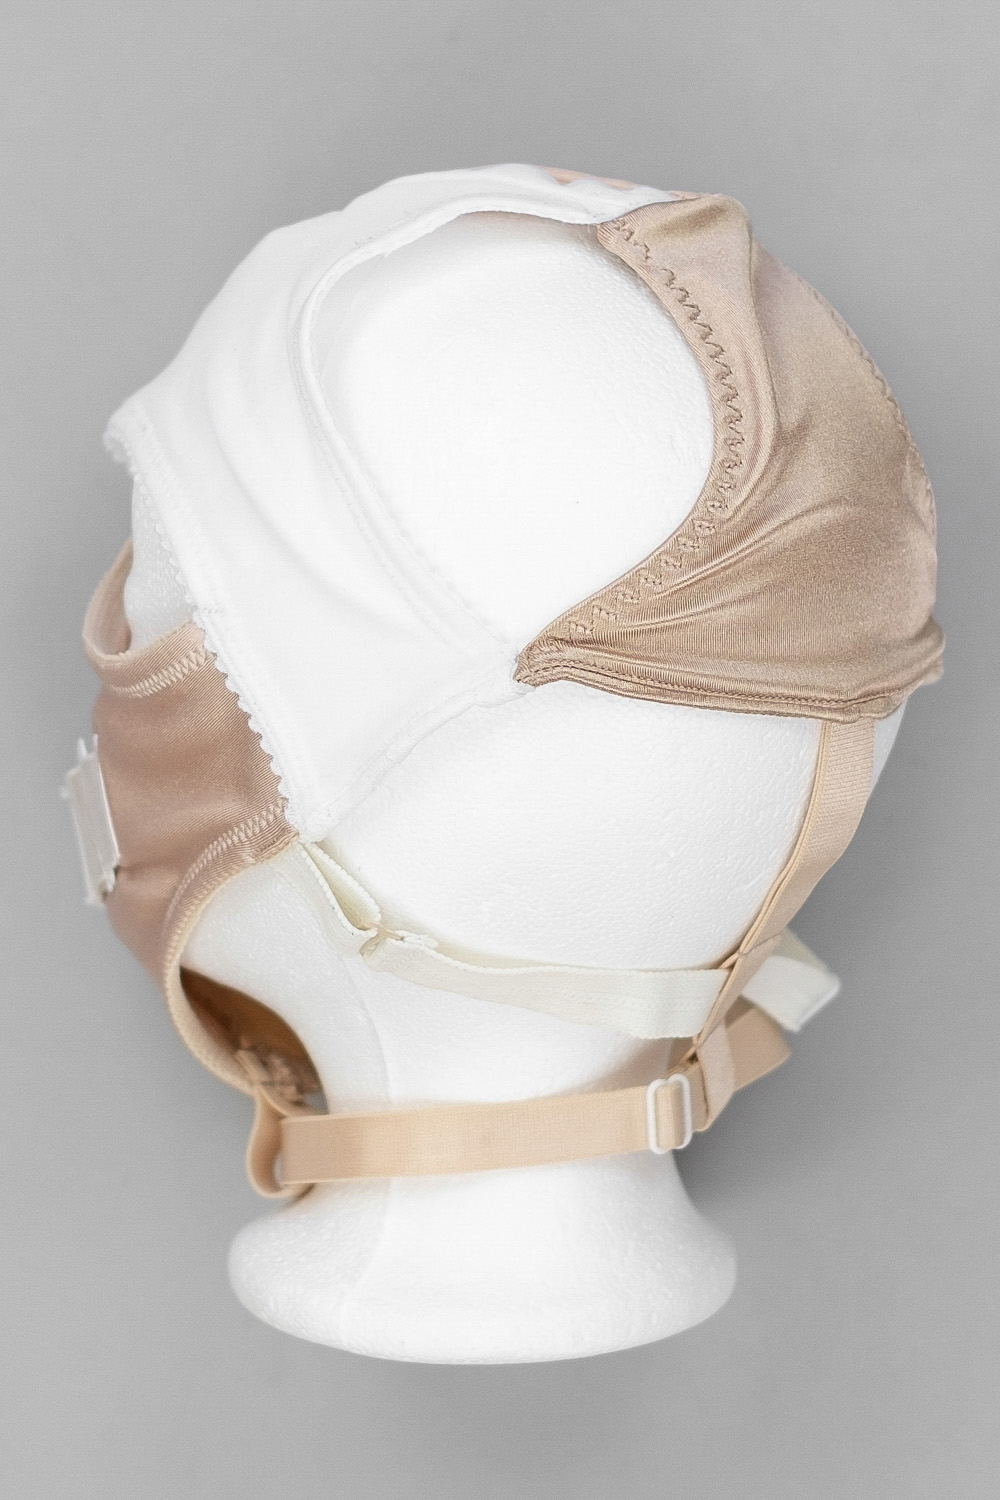 Gusset Mask in Beige and White 3